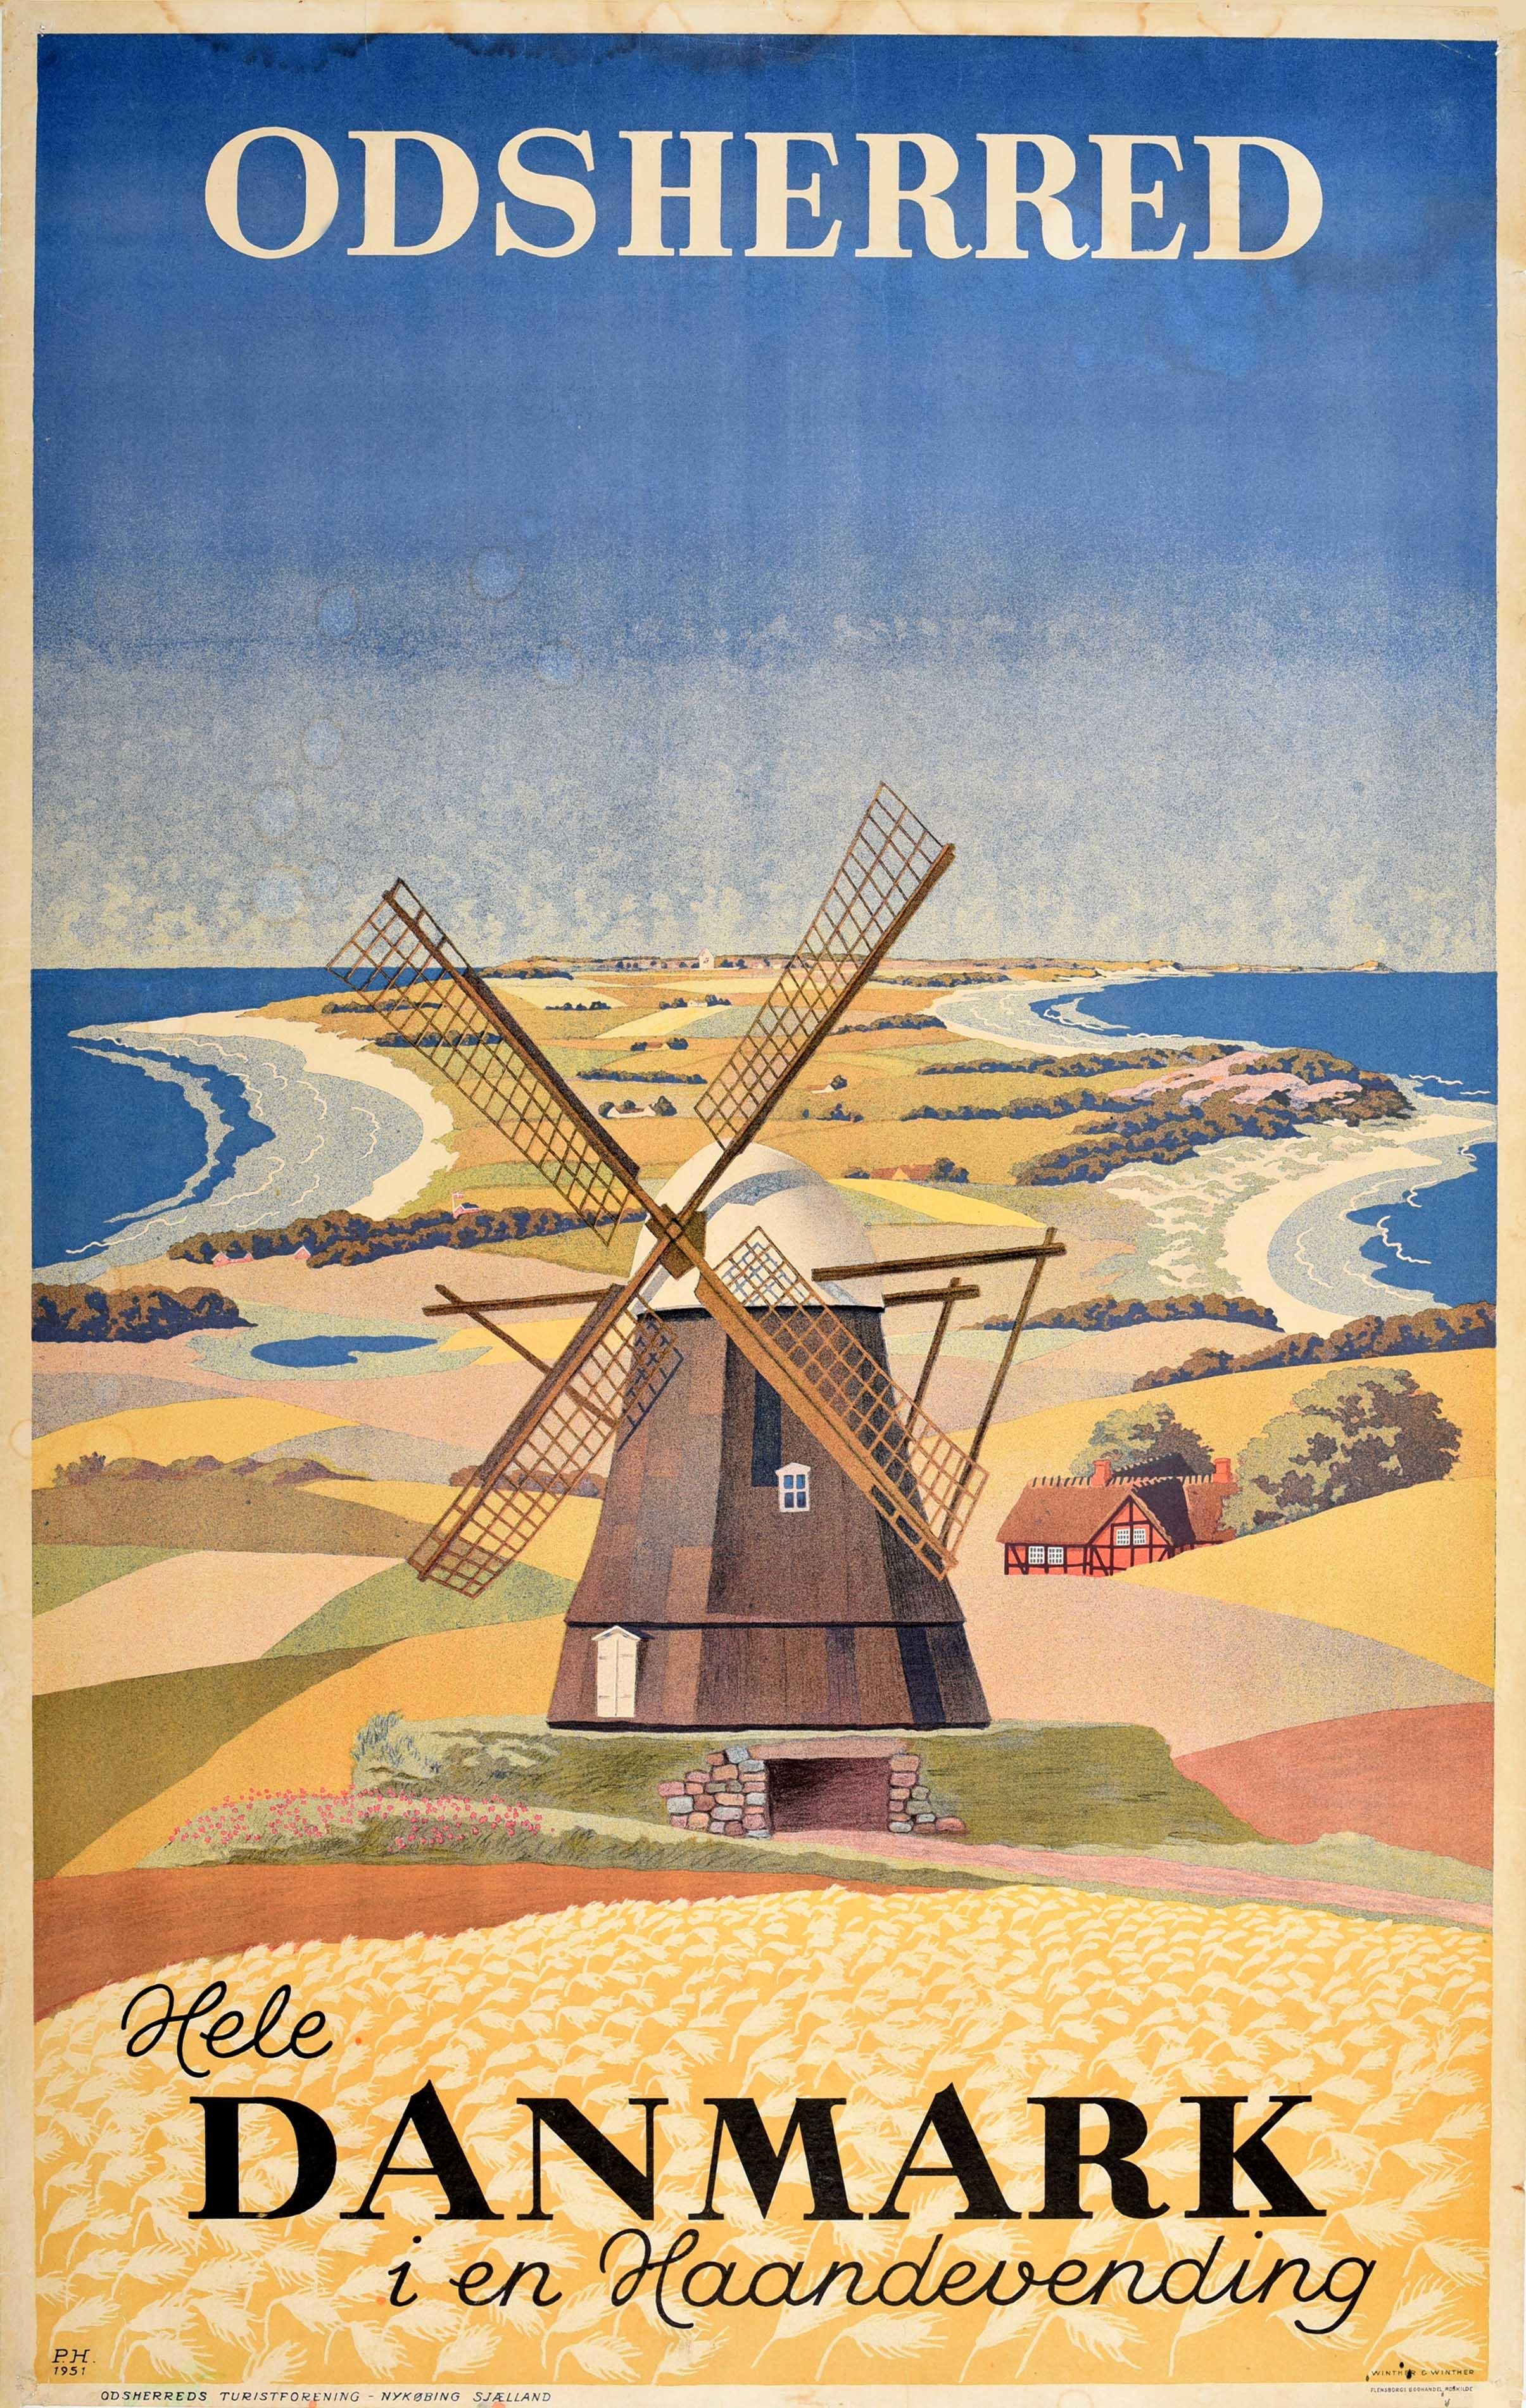 Original vintage travel poster for Odsherred Hele Danmark i en haandevending - All of Denmark in one go - featuring a scenic view of the countryside with a windmill in the foreground and the sea waving onto the sandy beaches on both sides of the